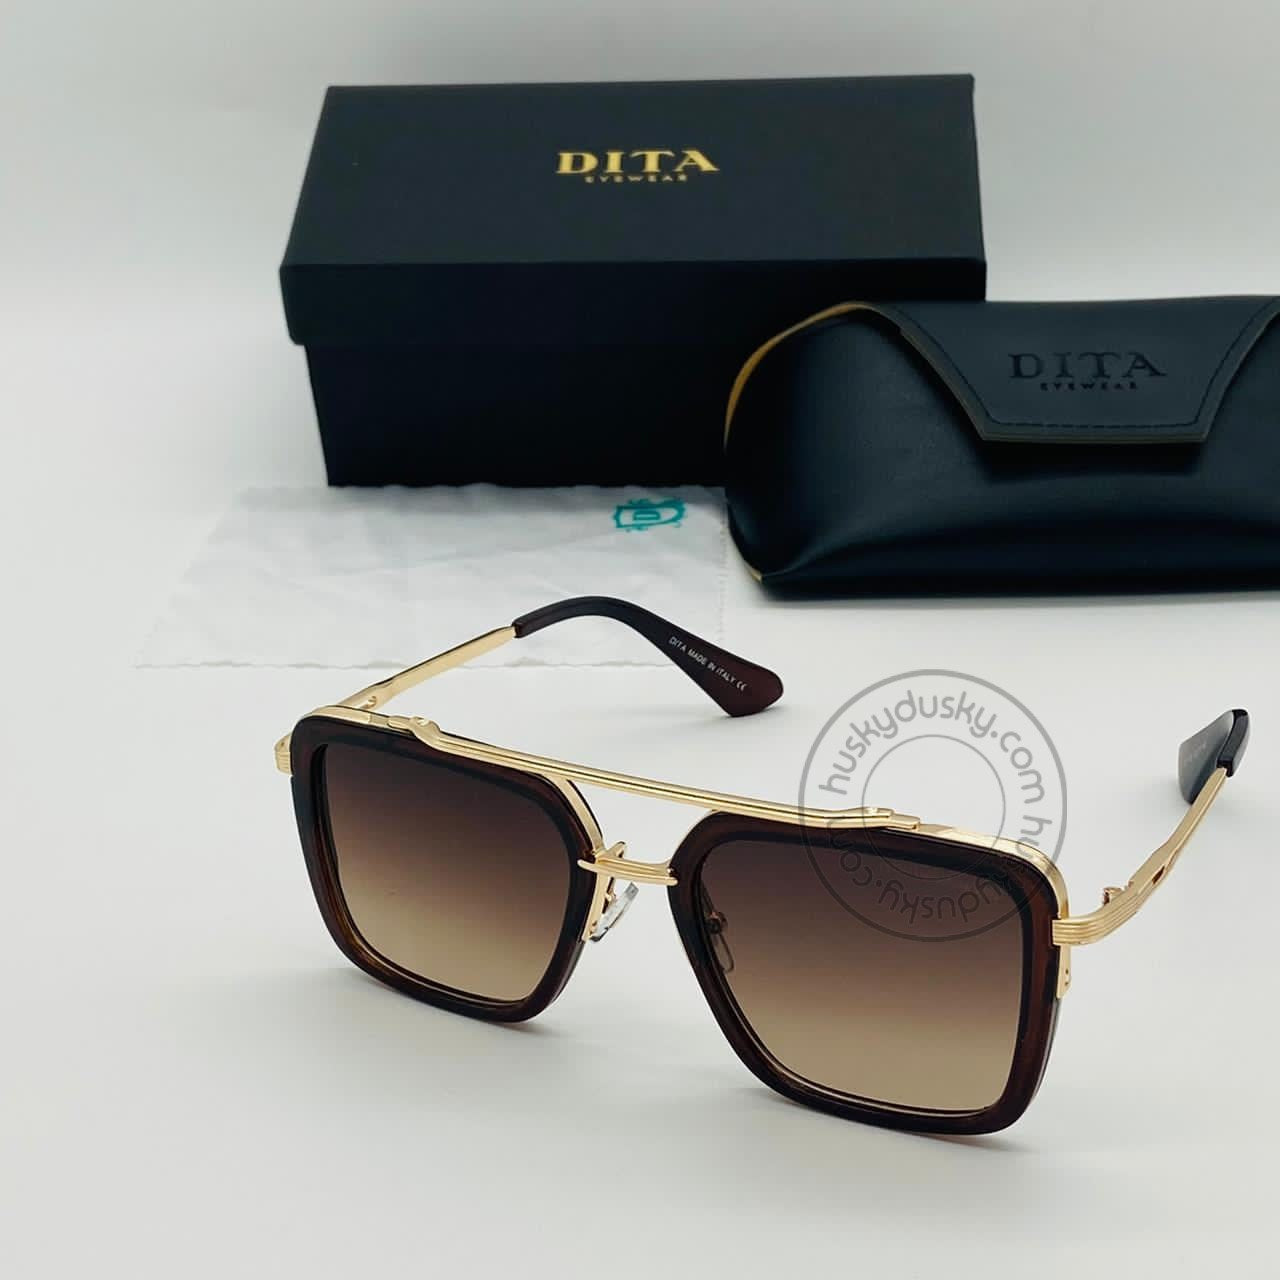 DITA Brown Color Glass Man's Women's Sunglass for Man Woman or Girl DT-17 Gold Frame Brown Stick Gift Sunglass